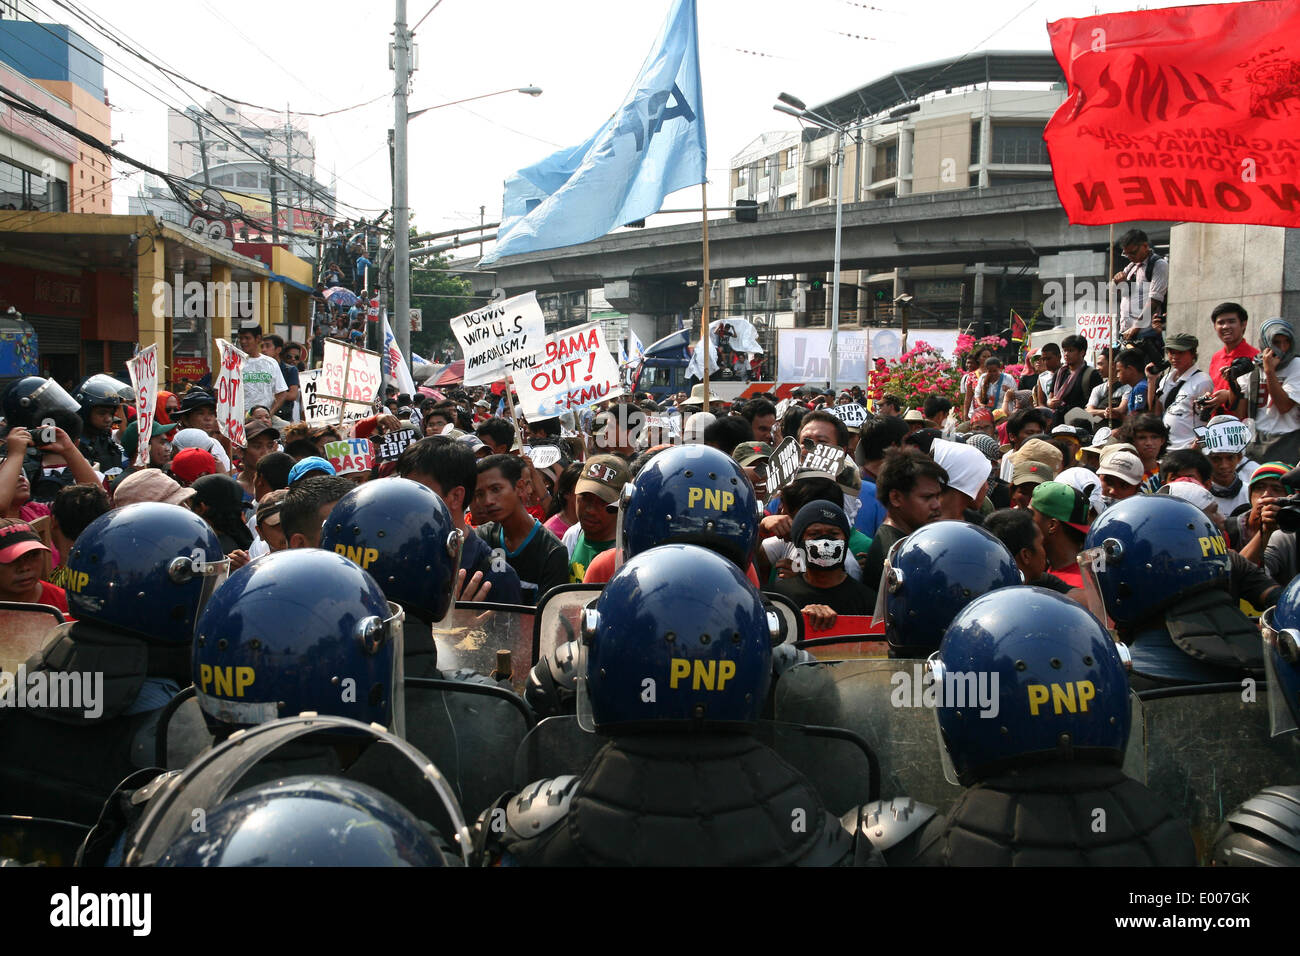 Manila, Philippines. 28th April, 2014. Protesters try to breach the police line in Mendiola, Manila. Thousands of protesters joined the march to Mendiola denouncing the state visit of U.S. President Barack Obama and the recently signed Enhanced Defense Cooperation Agreement between the Philippines and U.S. that would allow an increased number of U.S. military presence in the country. (Photo by J Gerard Seguia/Pacific Press/Alamy Live News) Stock Photo